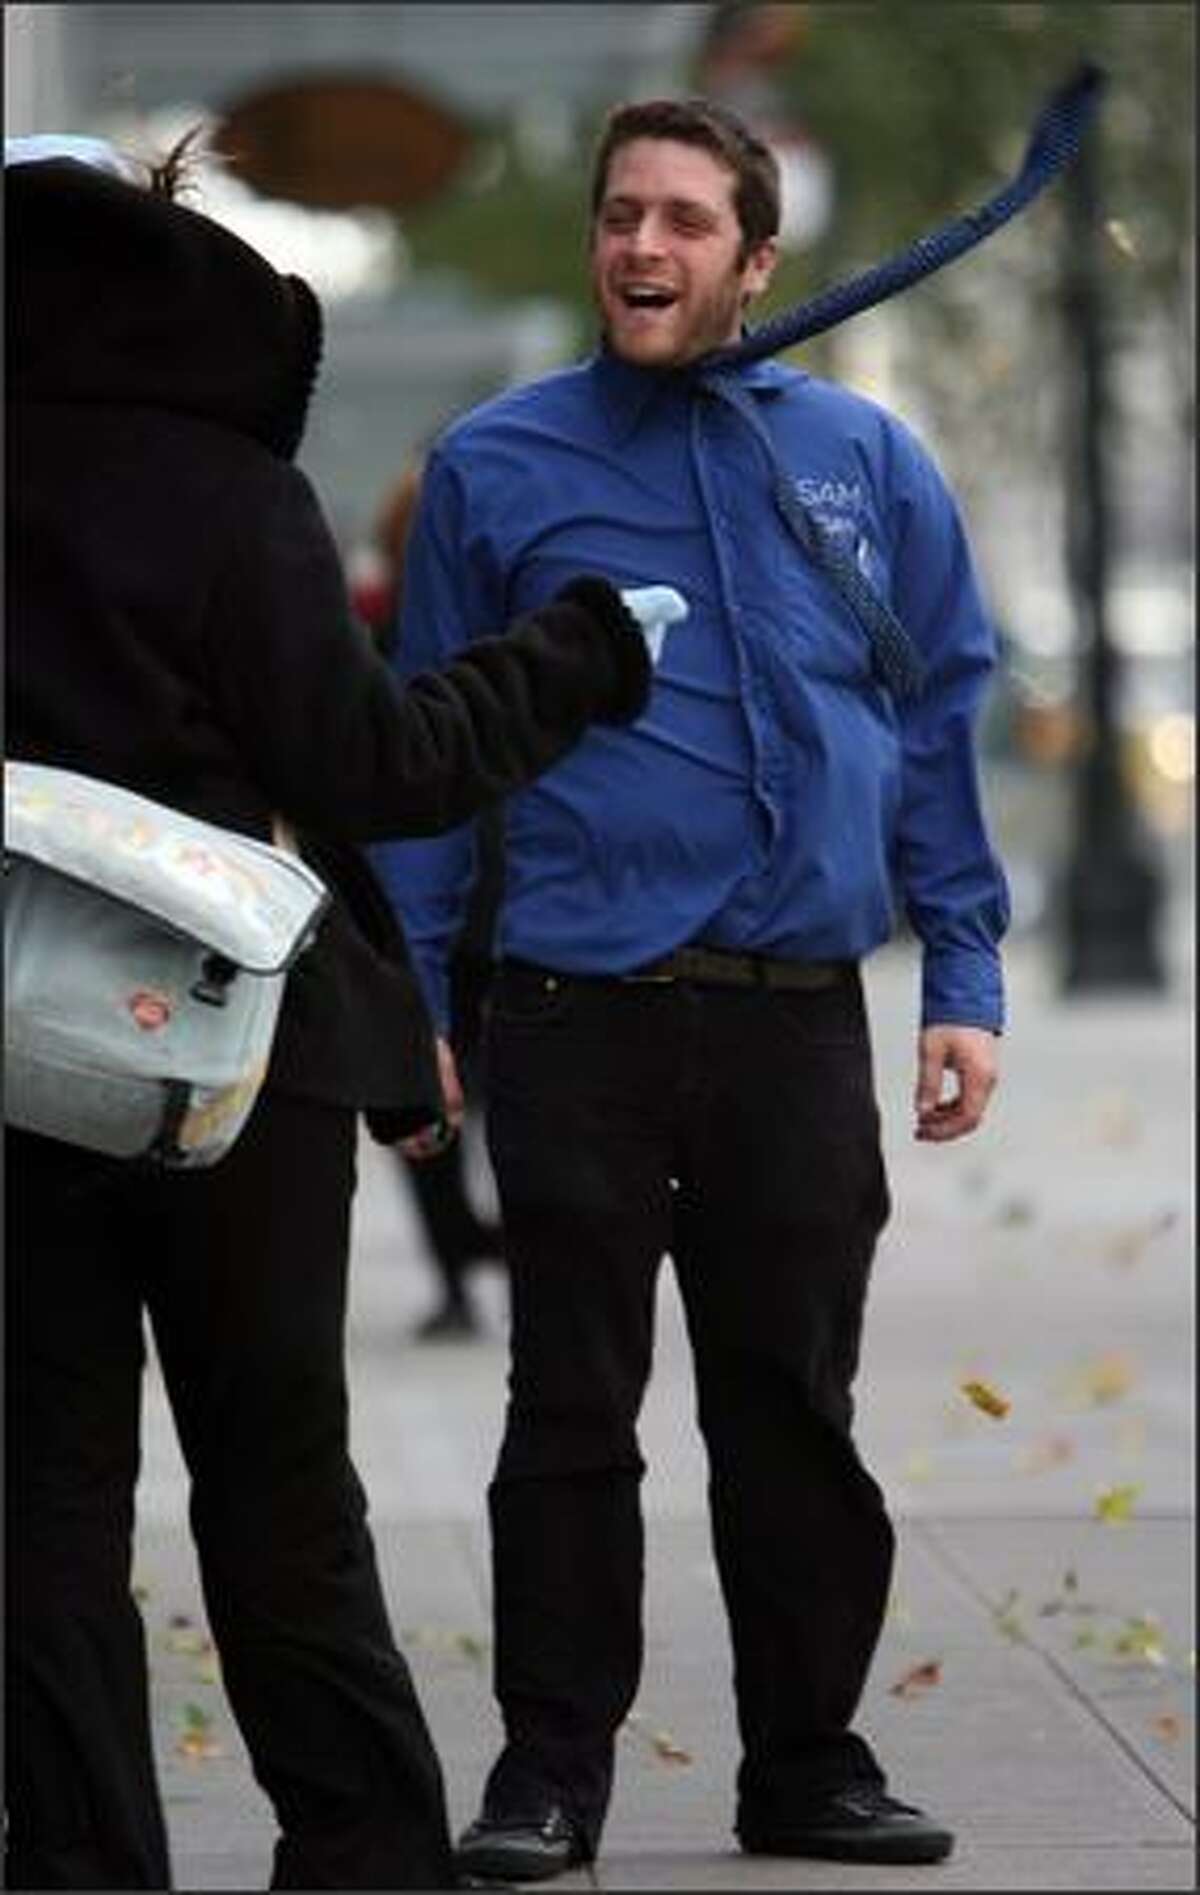 Rob Femur, who works at the Seattle Art Museum, comes untied as high winds rip through downtown Seattle.